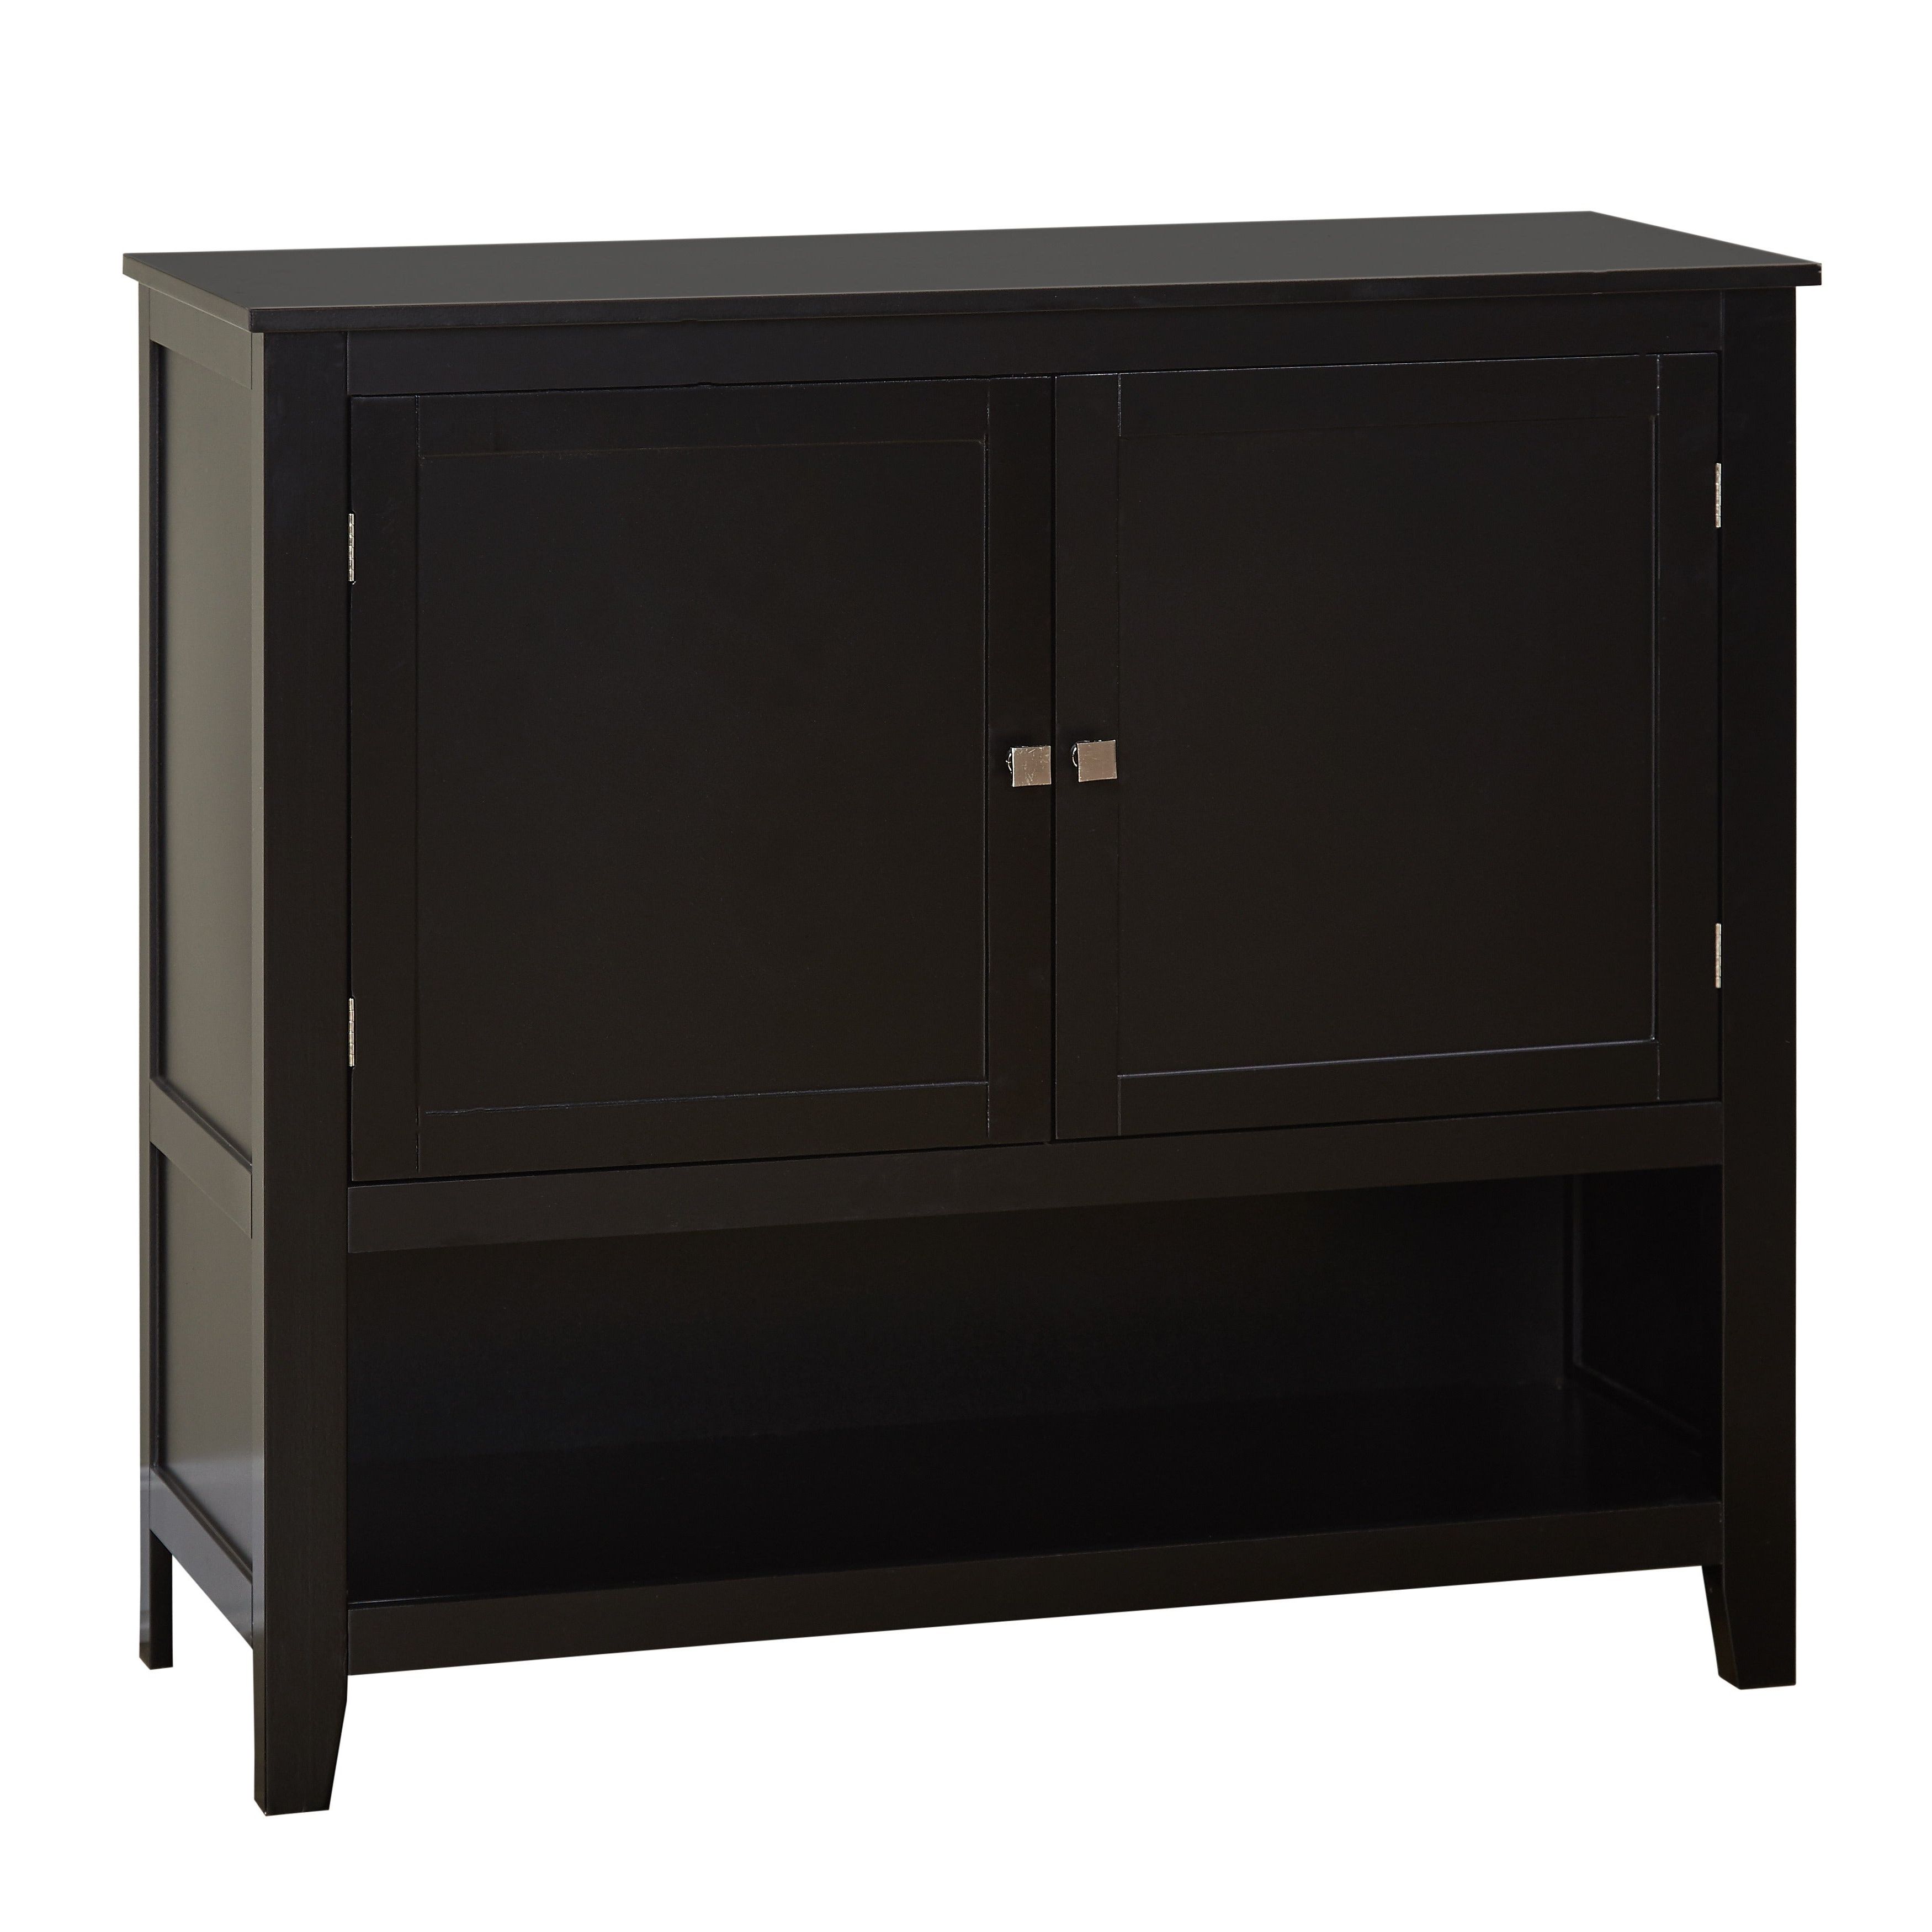 Simple Living Montego Black Wooden Buffet Within Simple Living Montego Black Wooden Buffets (Gallery 2 of 20)